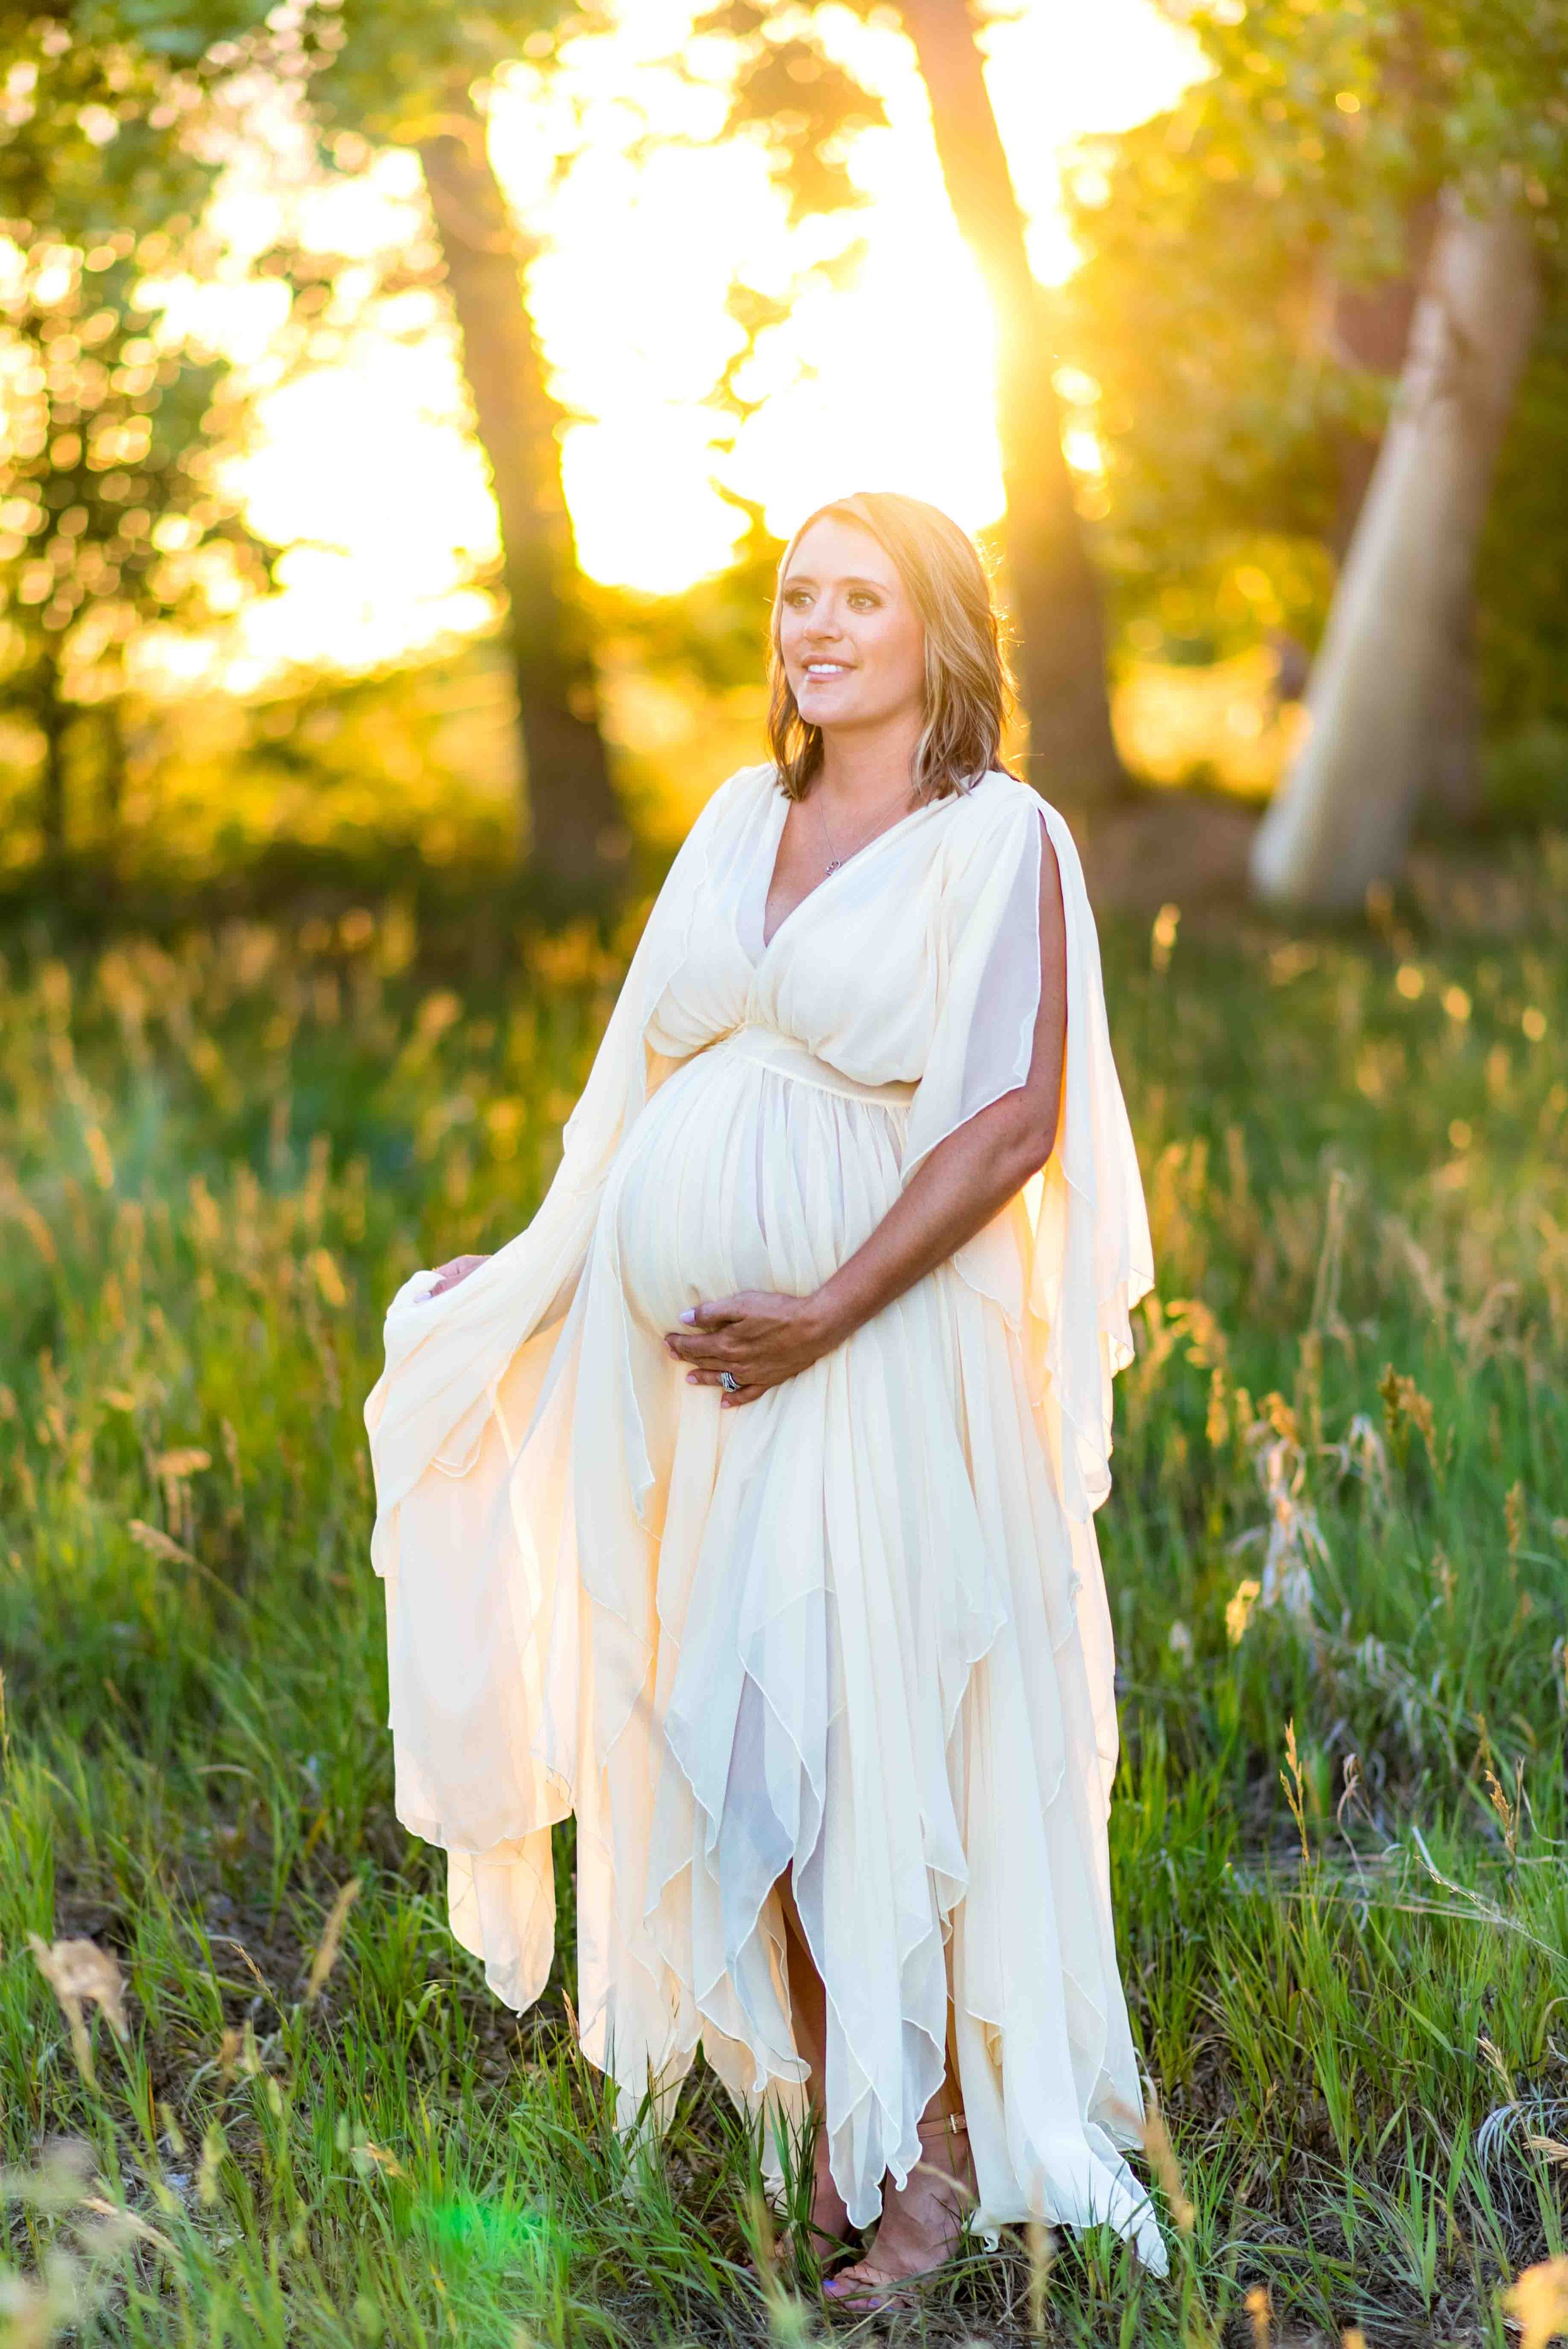 How Can I Look Amazing for My Maternity Photos? The Photographer's